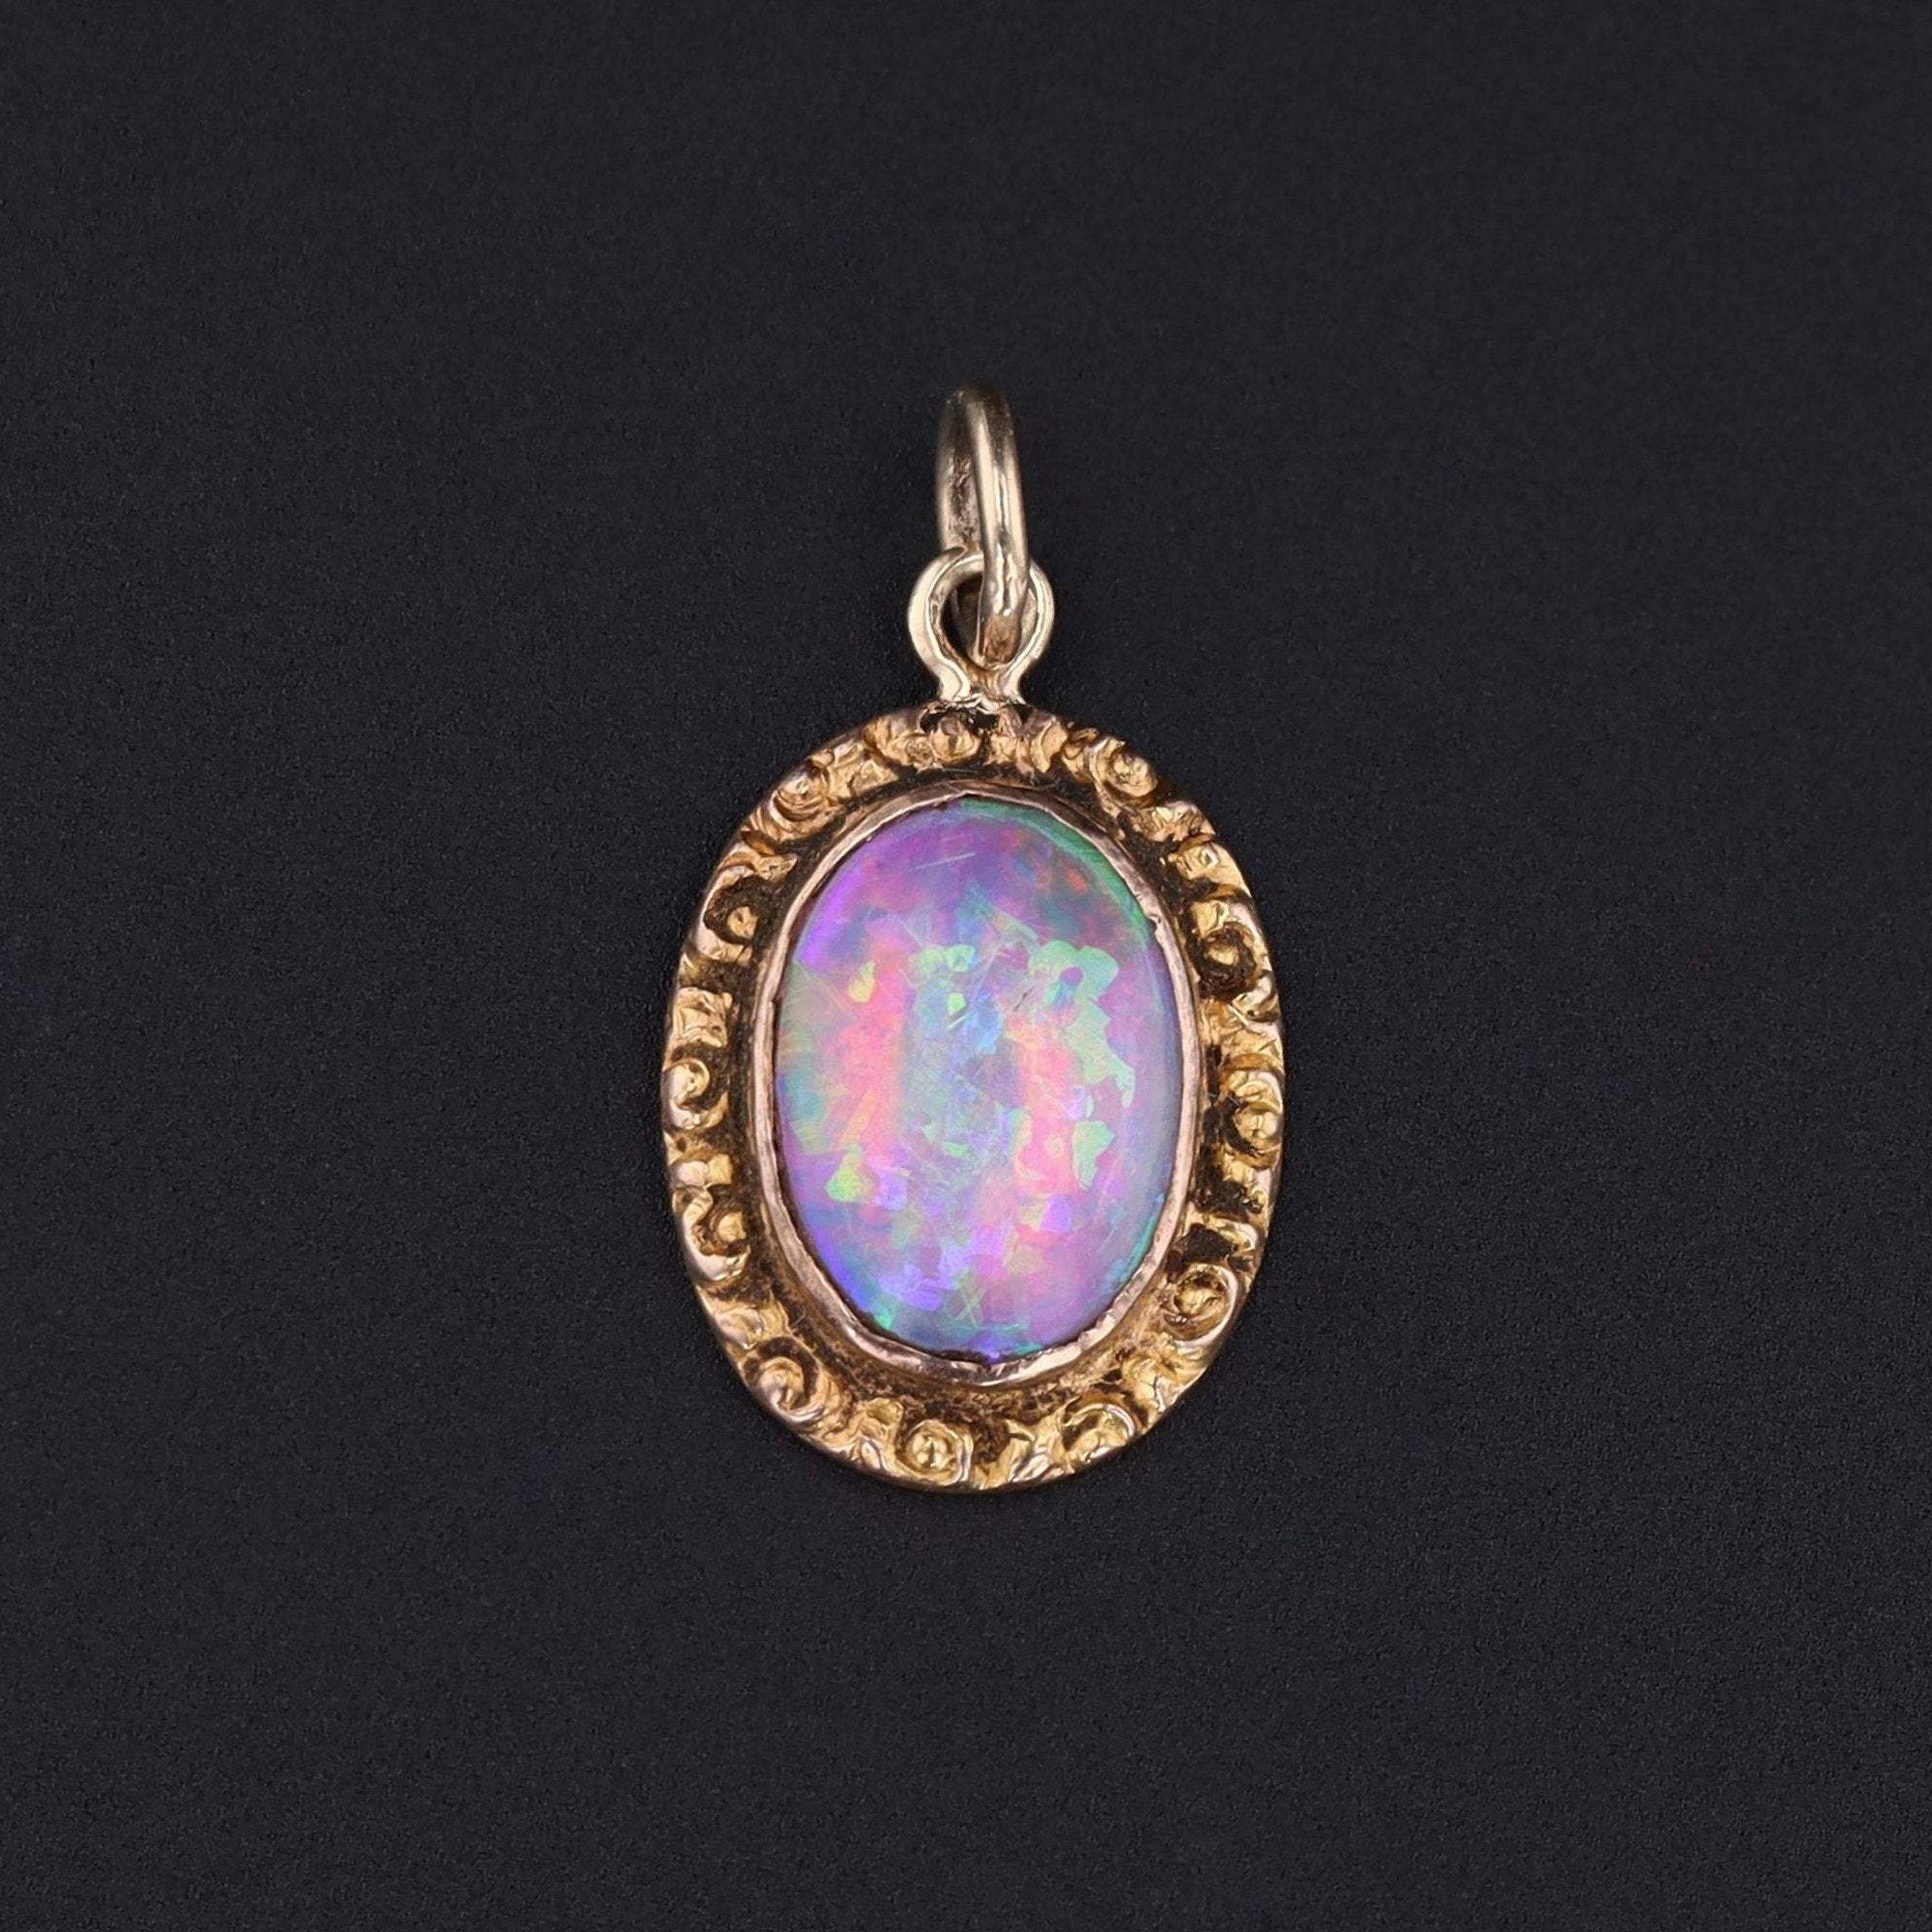 Opal Charm | Antique Pin Conversion | Antique Opal Charm | October Birthstone